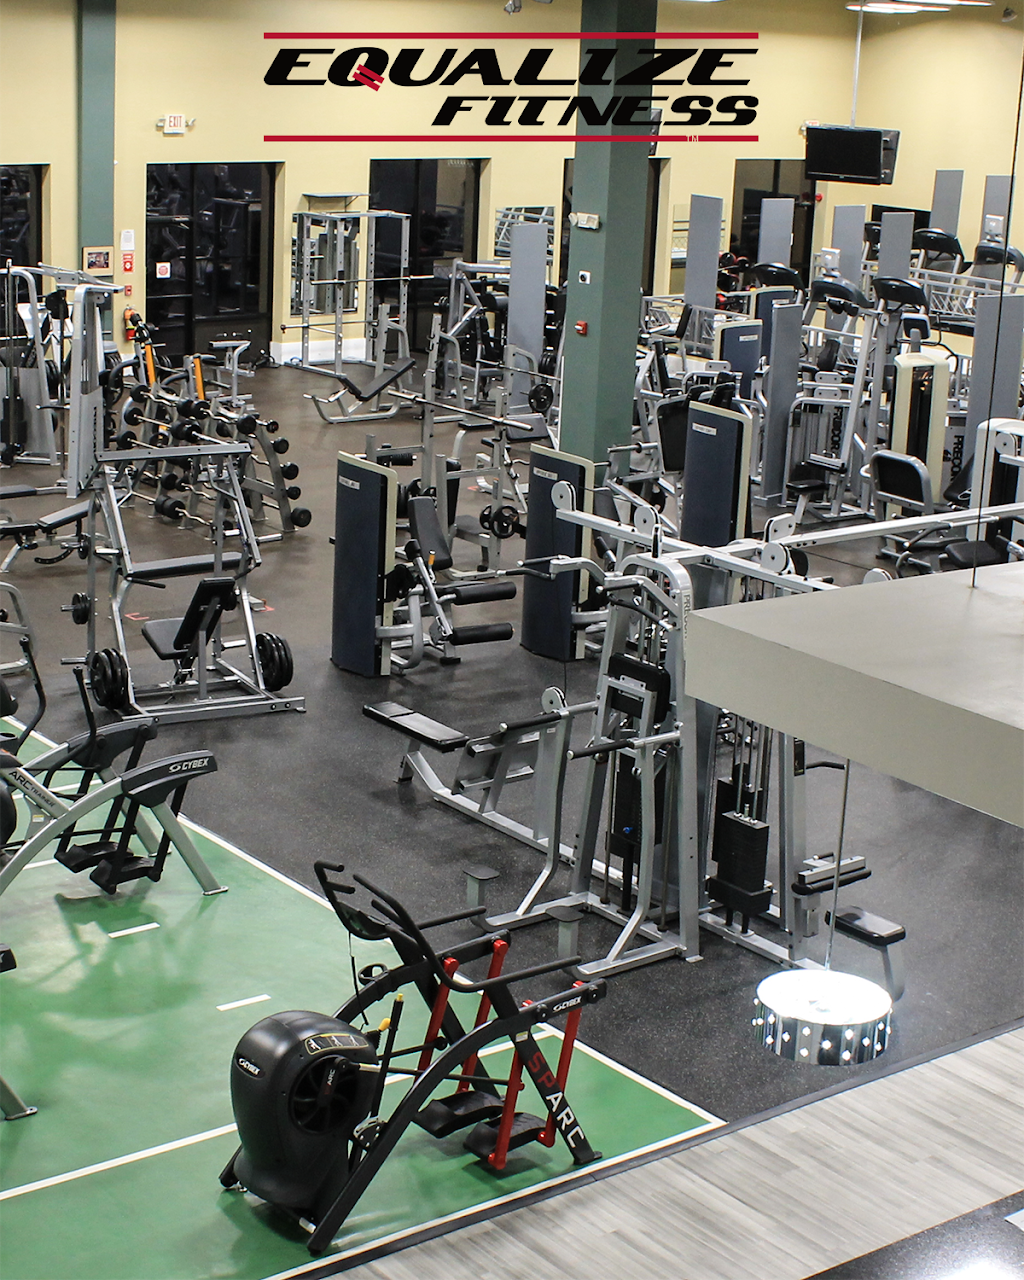 Equalize Fitness | 1 Odell Plaza #190, Yonkers, NY 10701 | Phone: (914) 751-6655